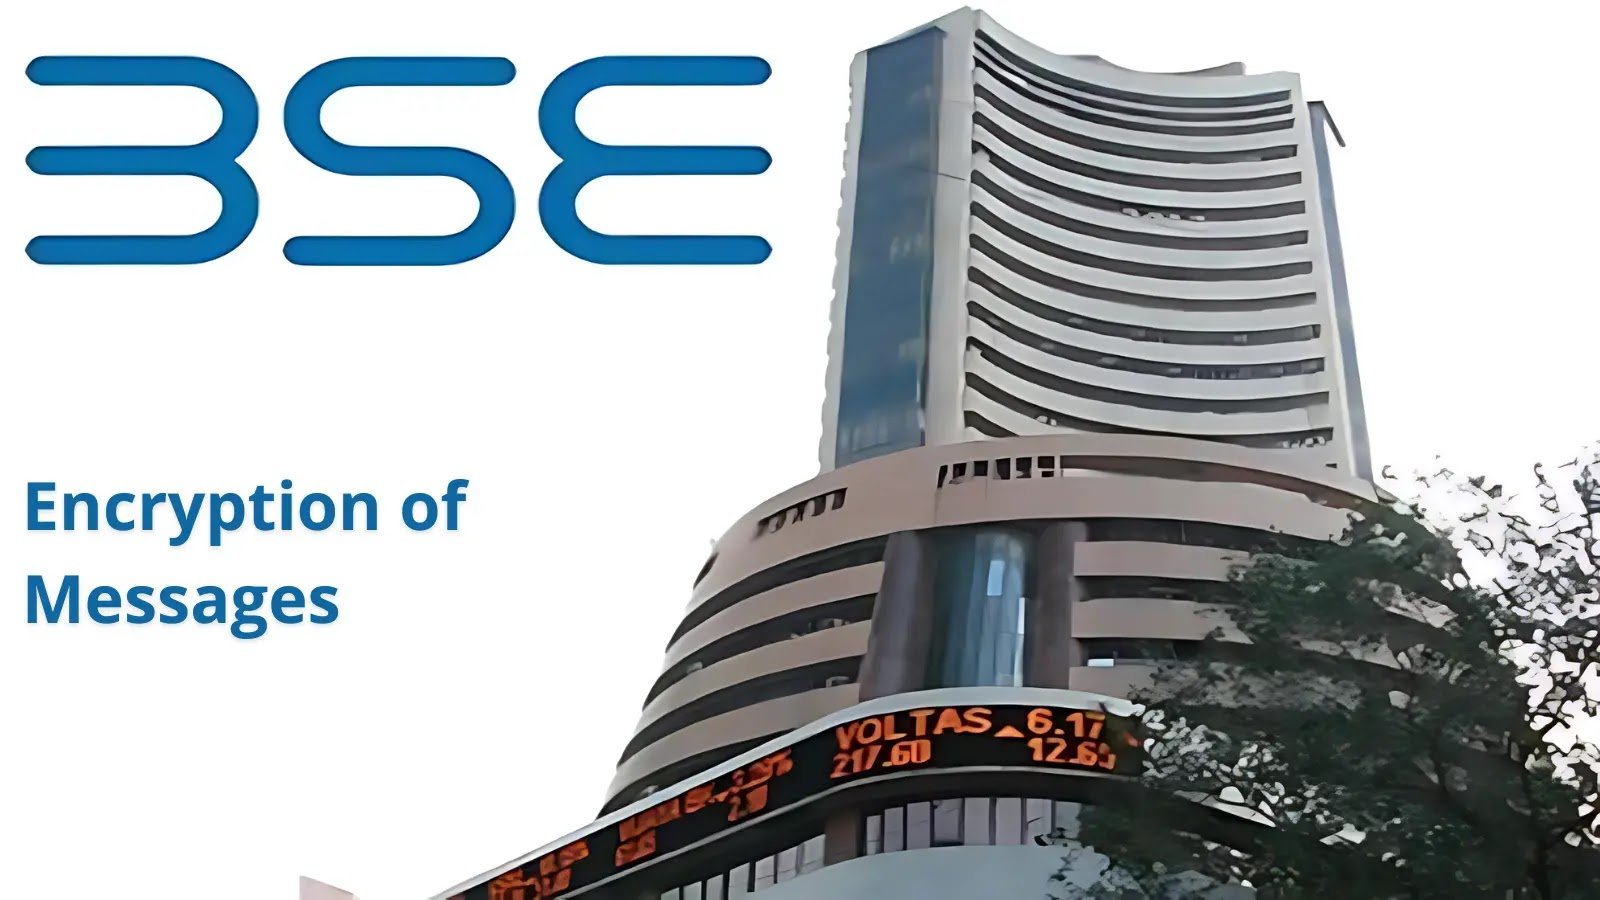 BSE Starts Encrypting Messages